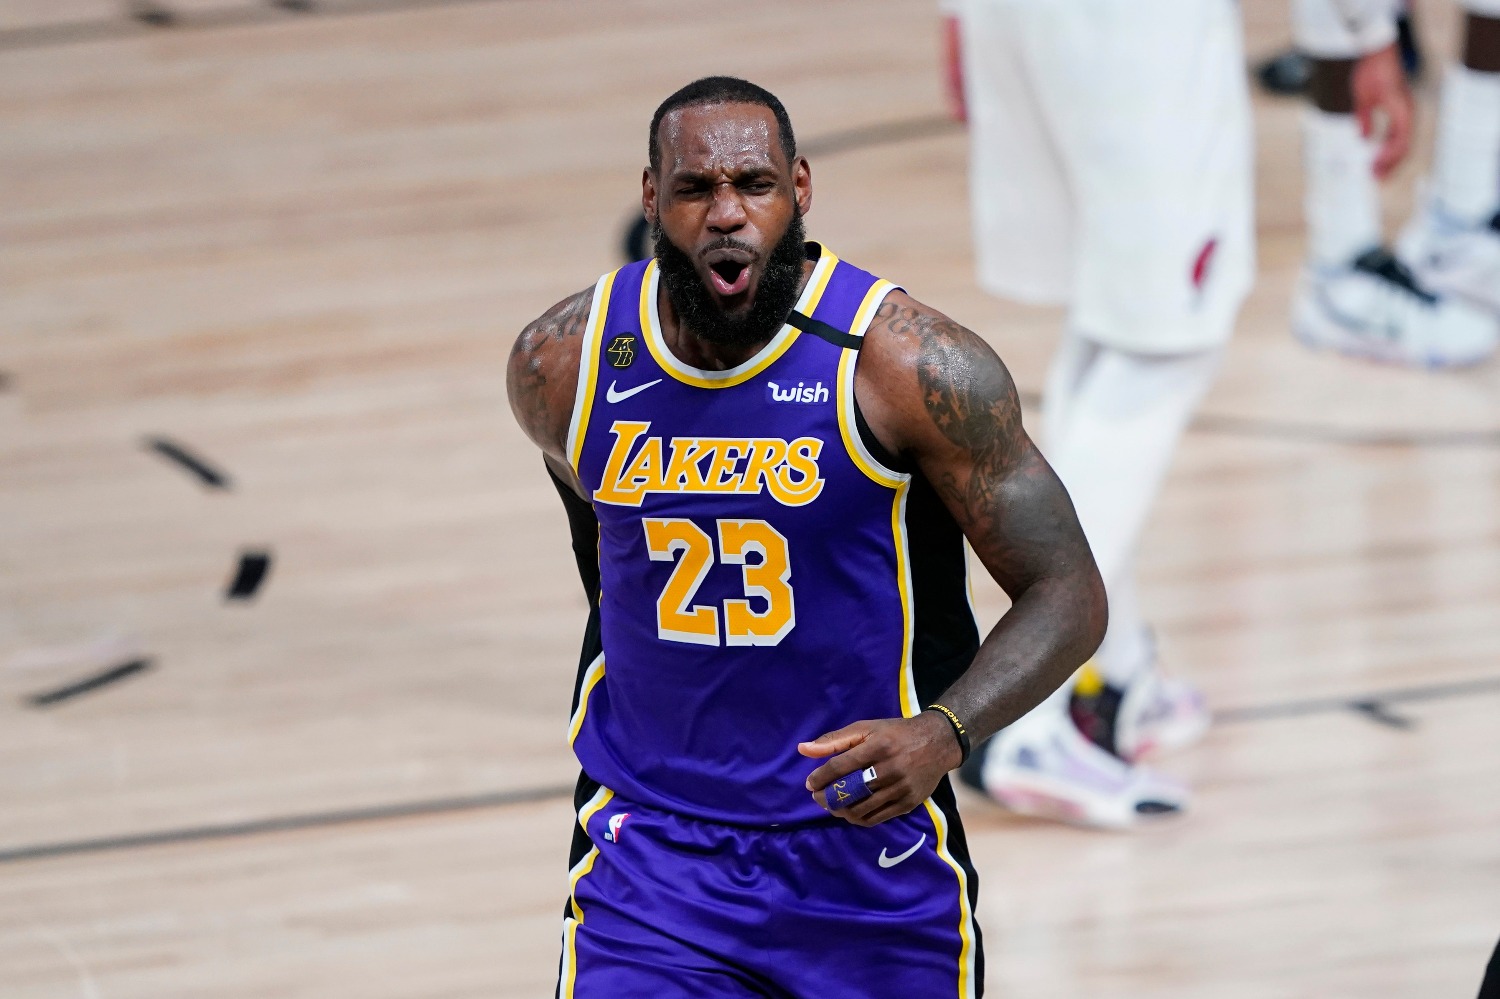 Lakers star LeBron James revealed how he stays sane in the NBA bubble in Orlando.